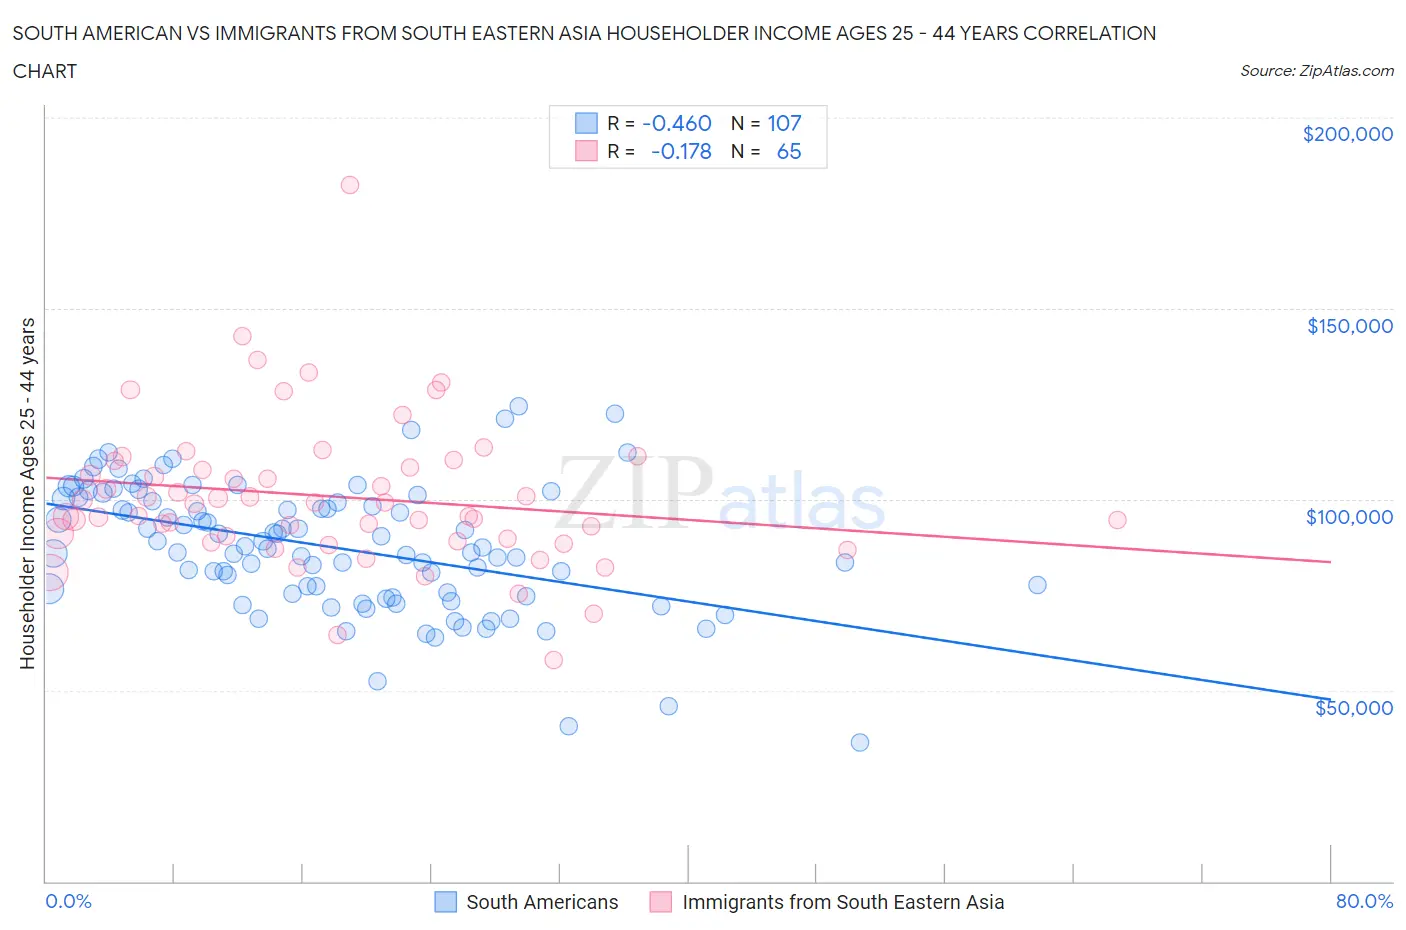 South American vs Immigrants from South Eastern Asia Householder Income Ages 25 - 44 years